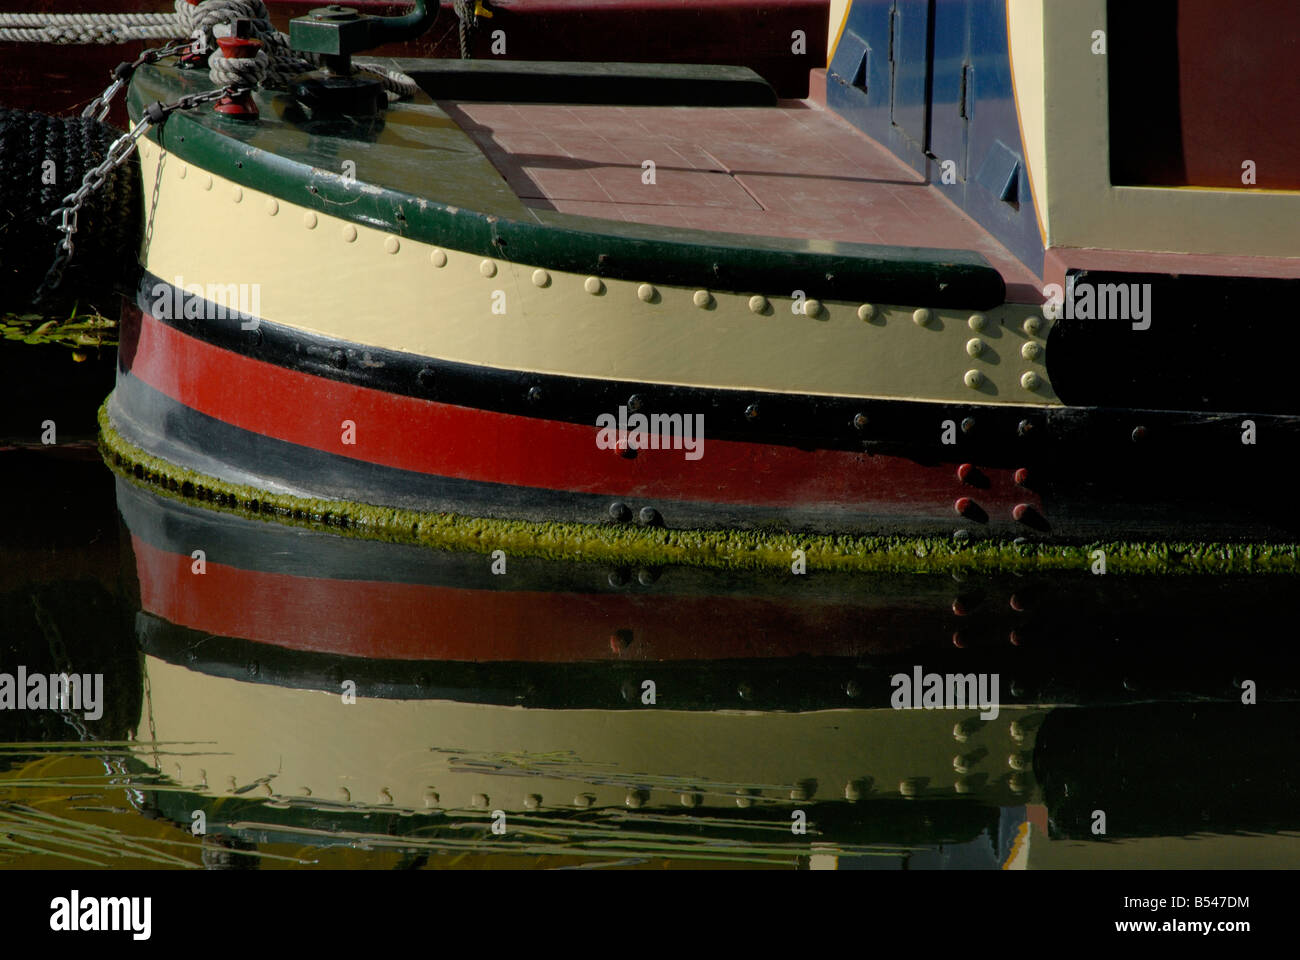 Rivetted stern and tiller of a traditional narrowboat reflected in the Slough Arm of the Grand Union Canal, Iver, London Stock Photo